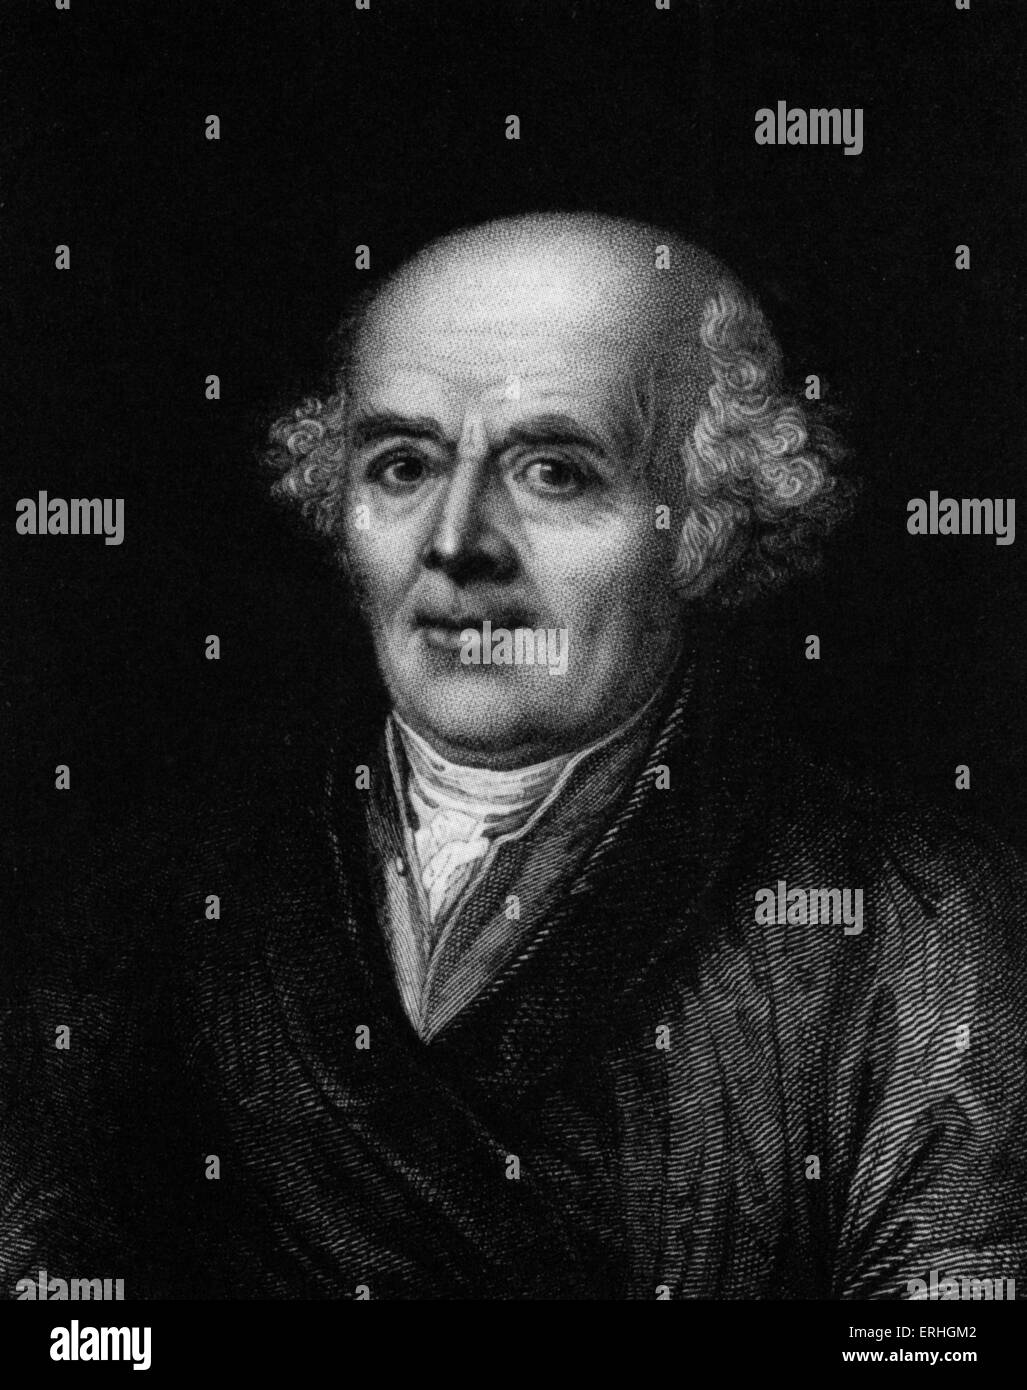 Samuel Hahnemann - portrait of the German physician and founder of homeopathic medicine. 10 April 1755 - 2 July 1843. From a Stock Photo